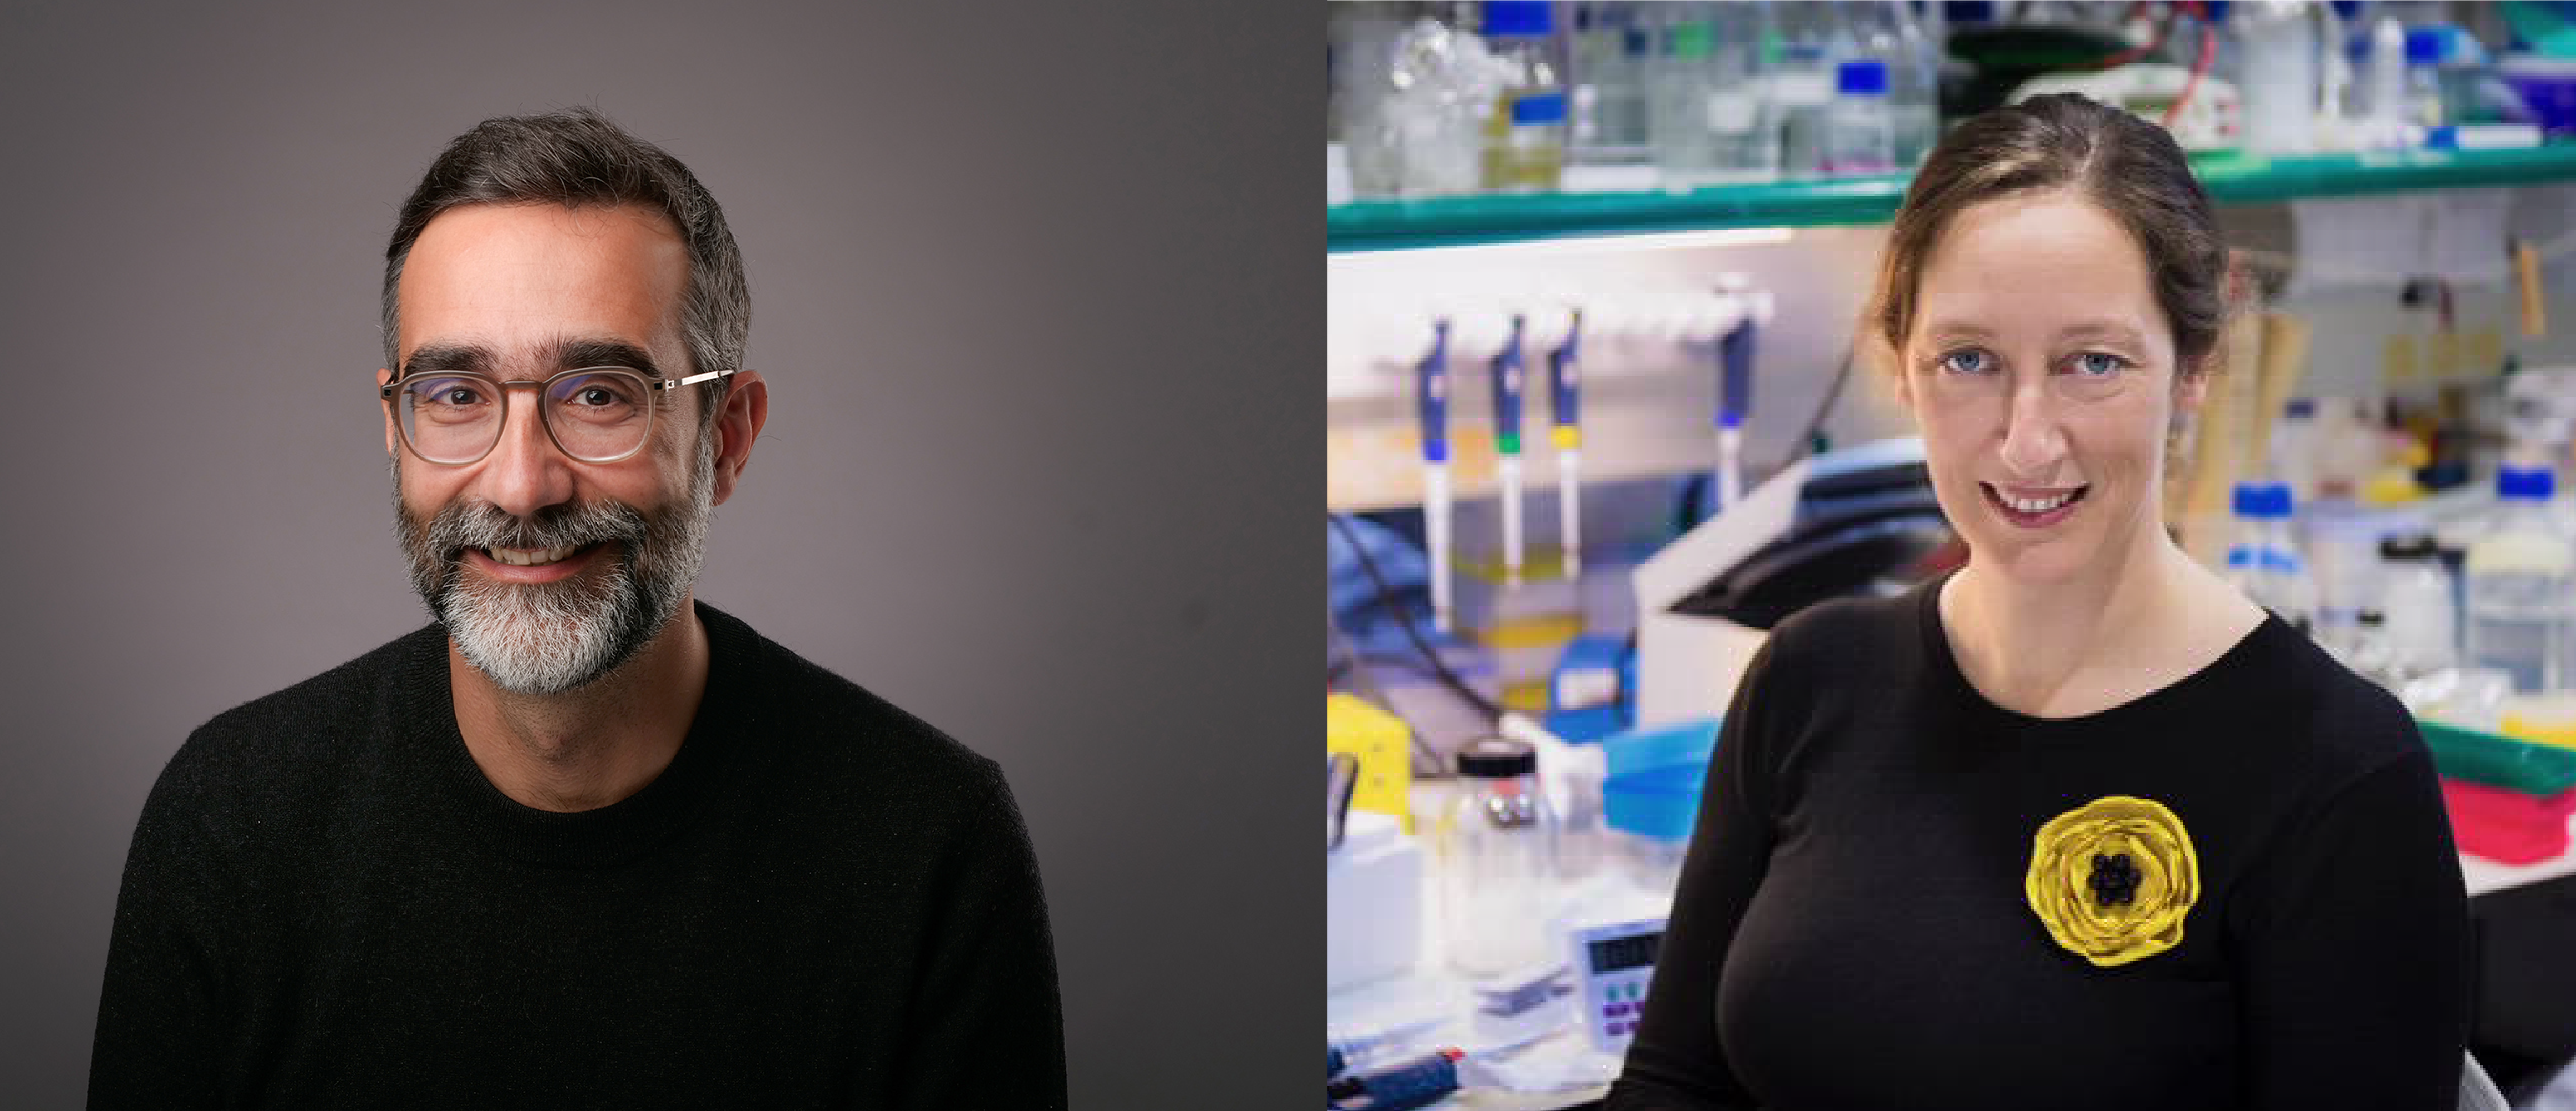 Two life scientists in Portugal elected as EMBO members